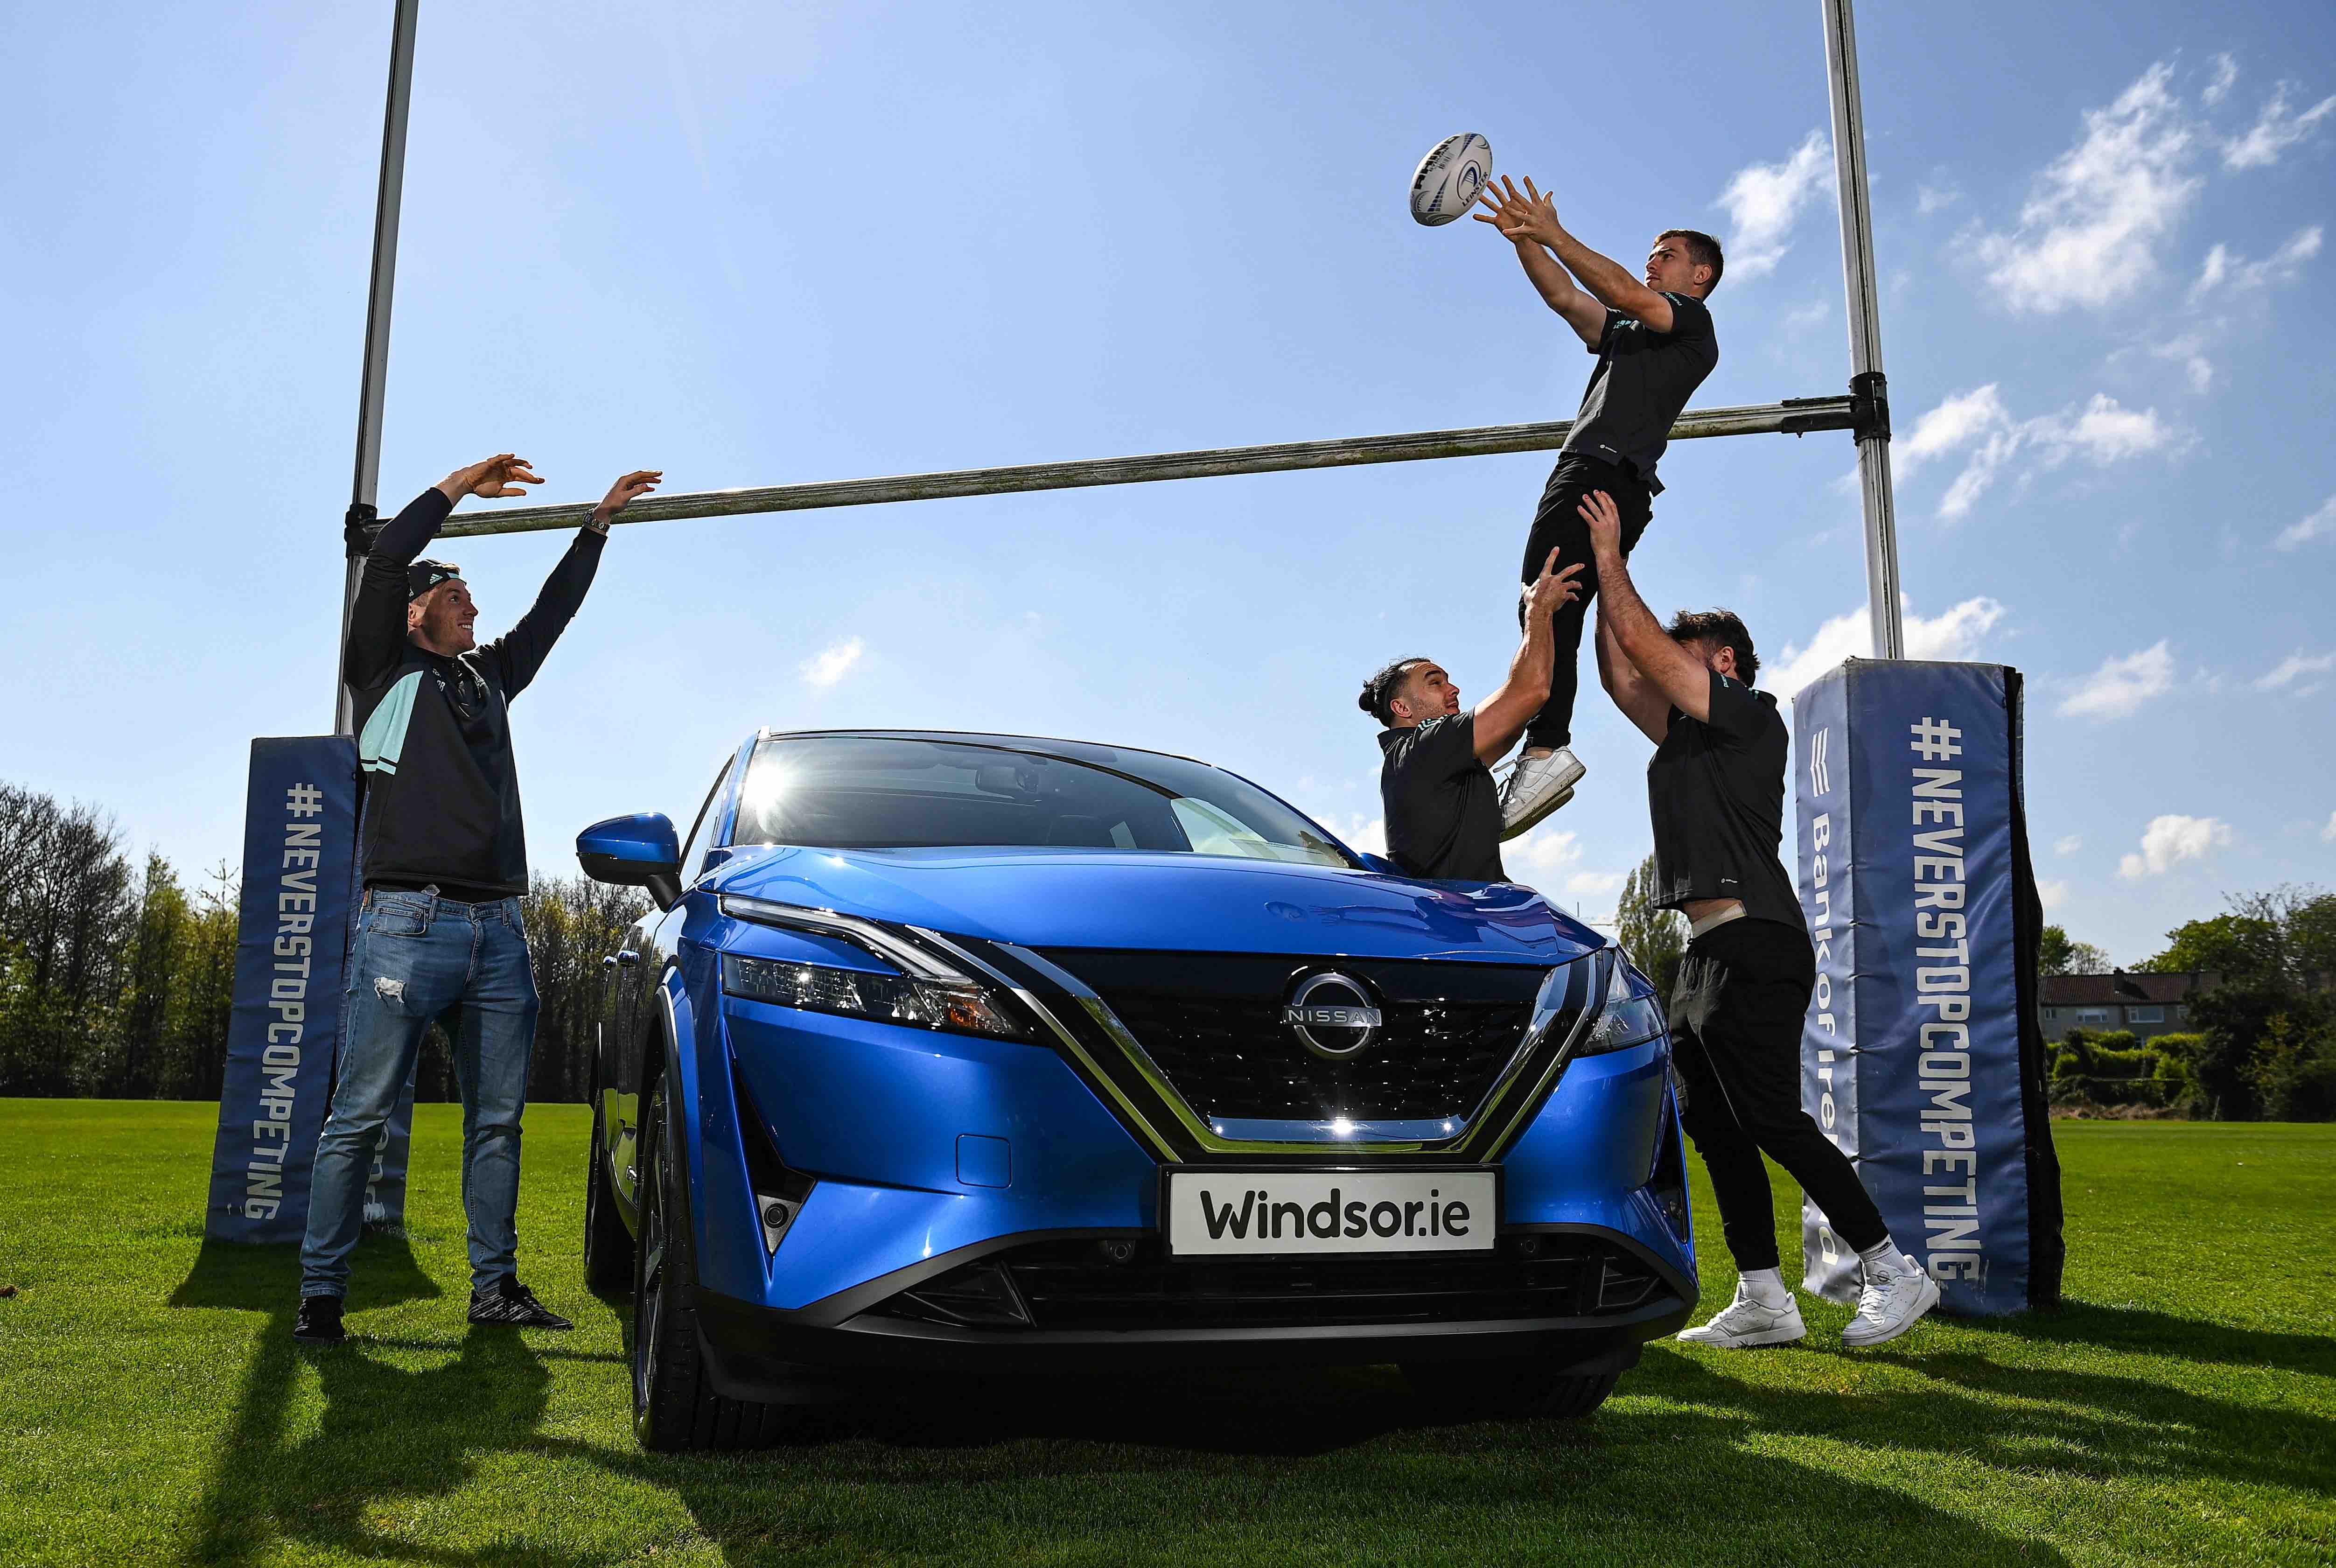 Windor motors have extended their sponsorship of the Leinster Rugby team